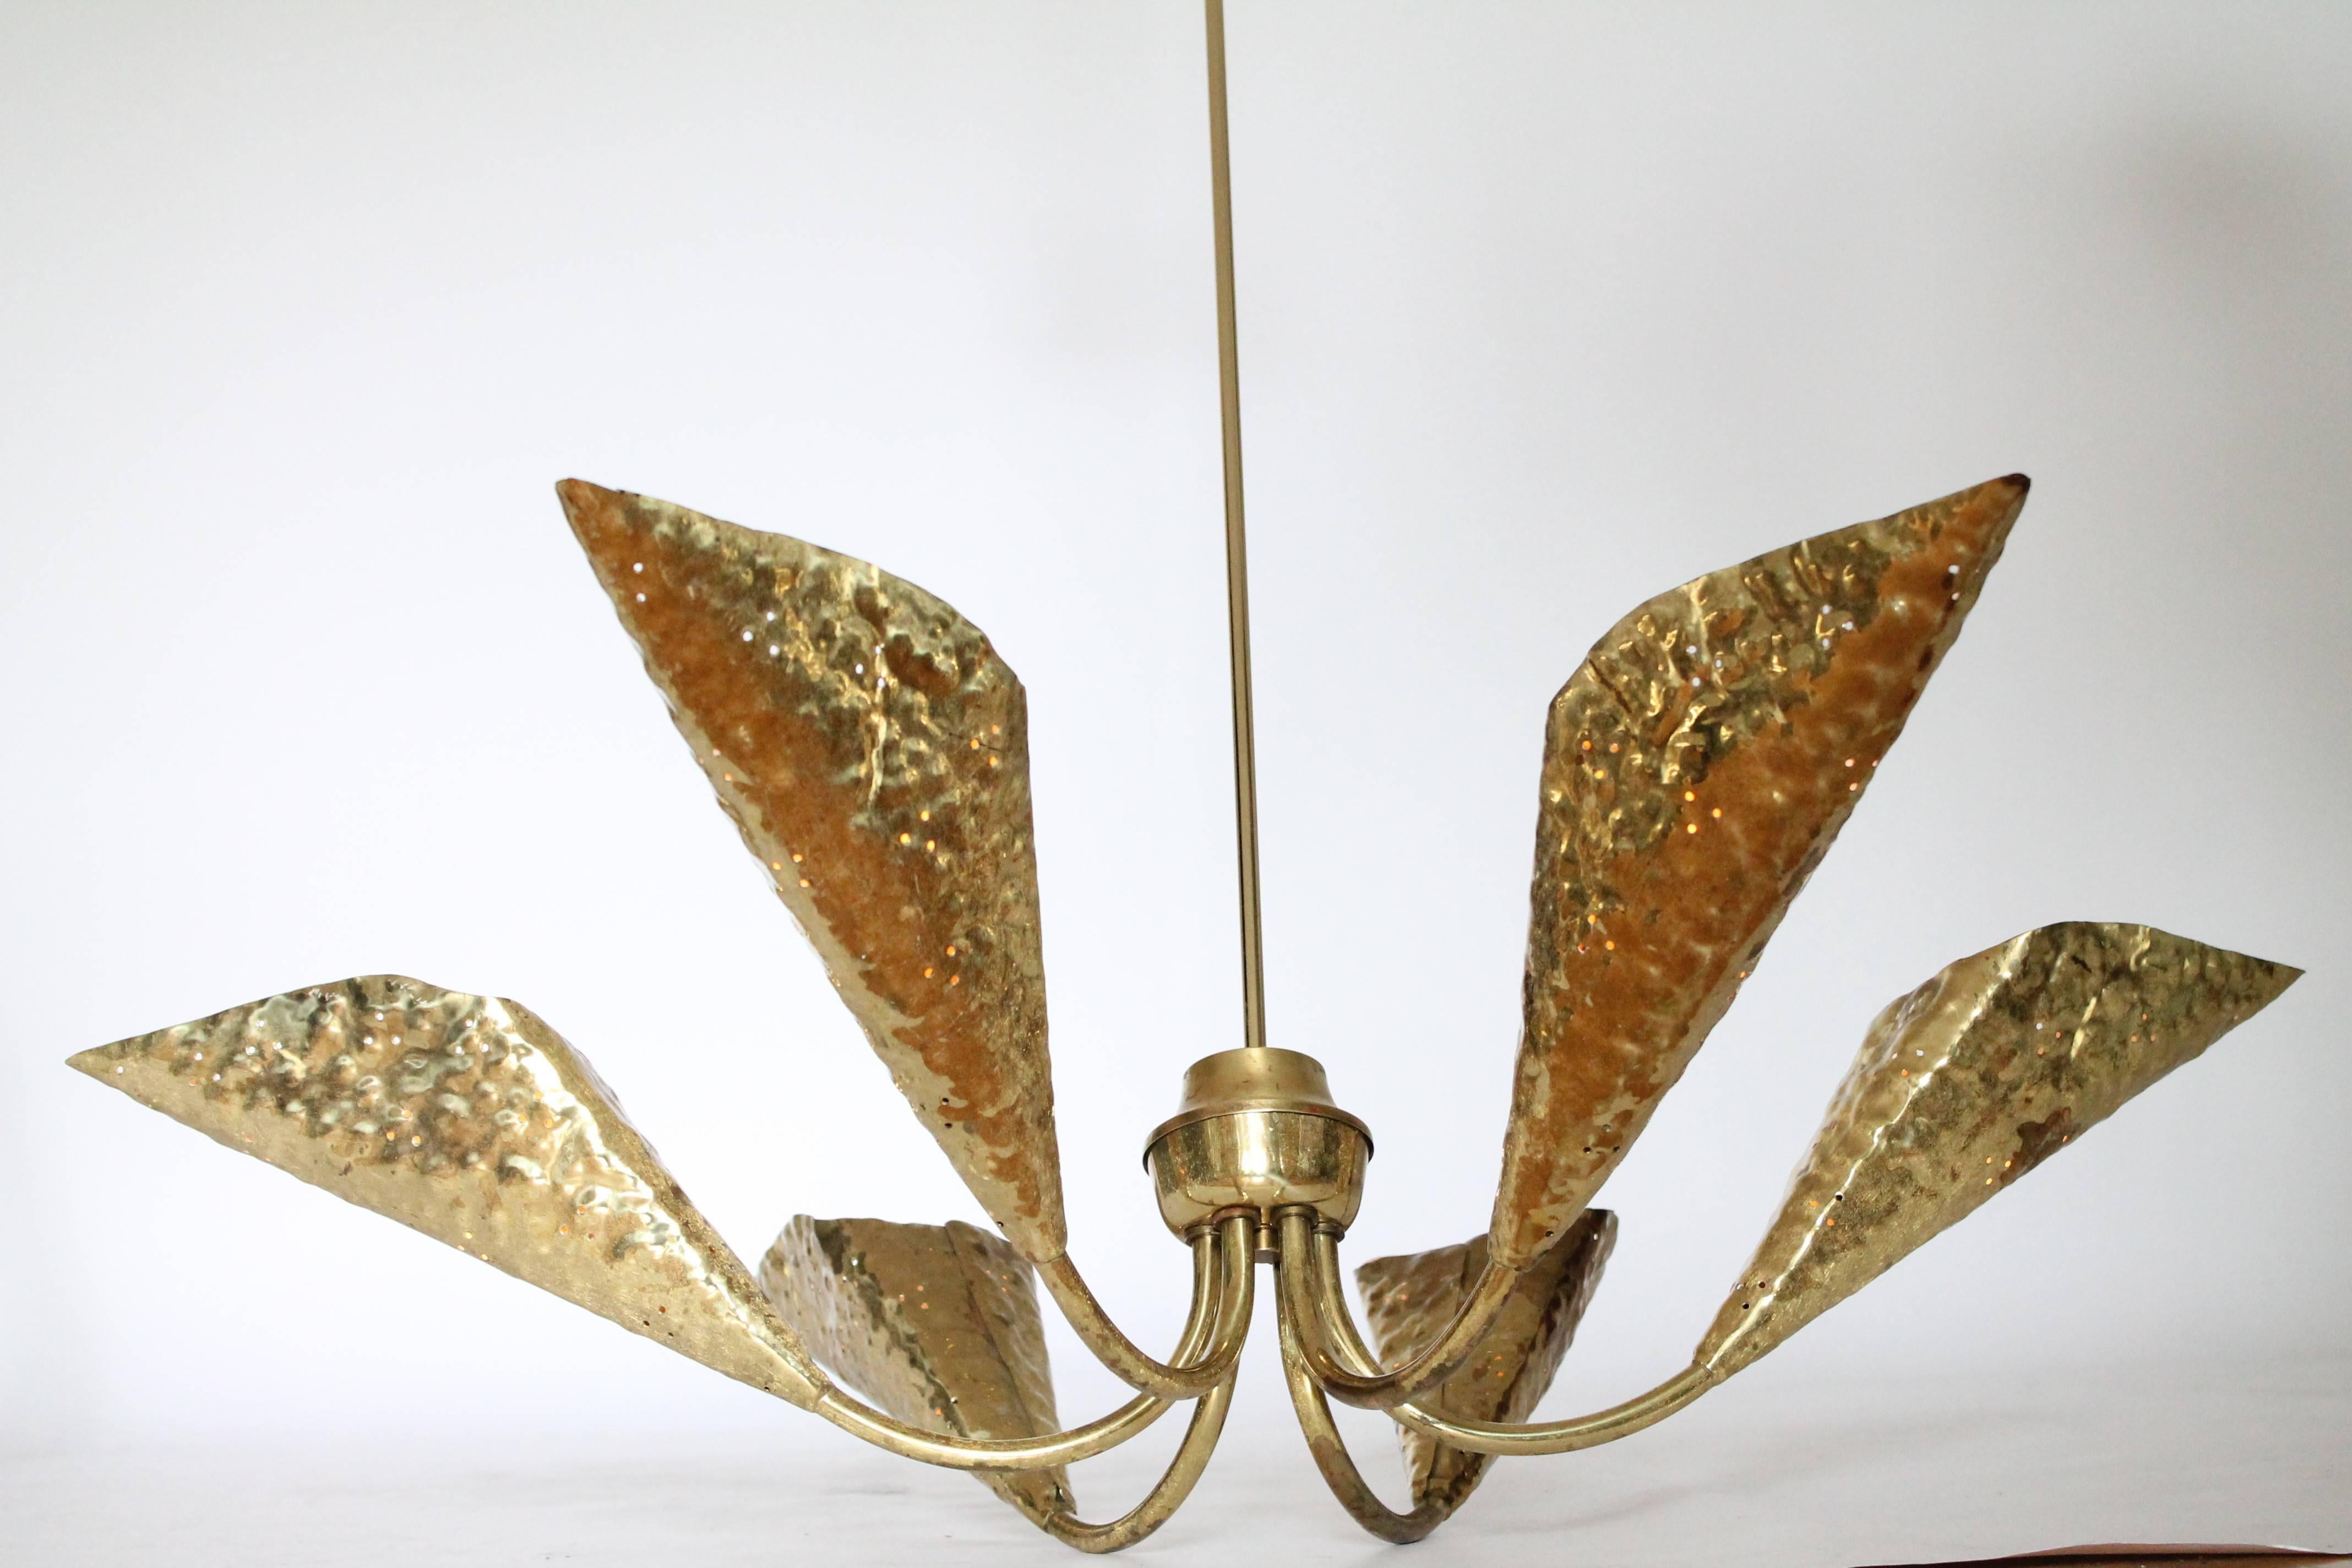 Italian Hand-Hammered Six-Arm Brass Chandelier in the style of Arredoluce , 1950s, Italy